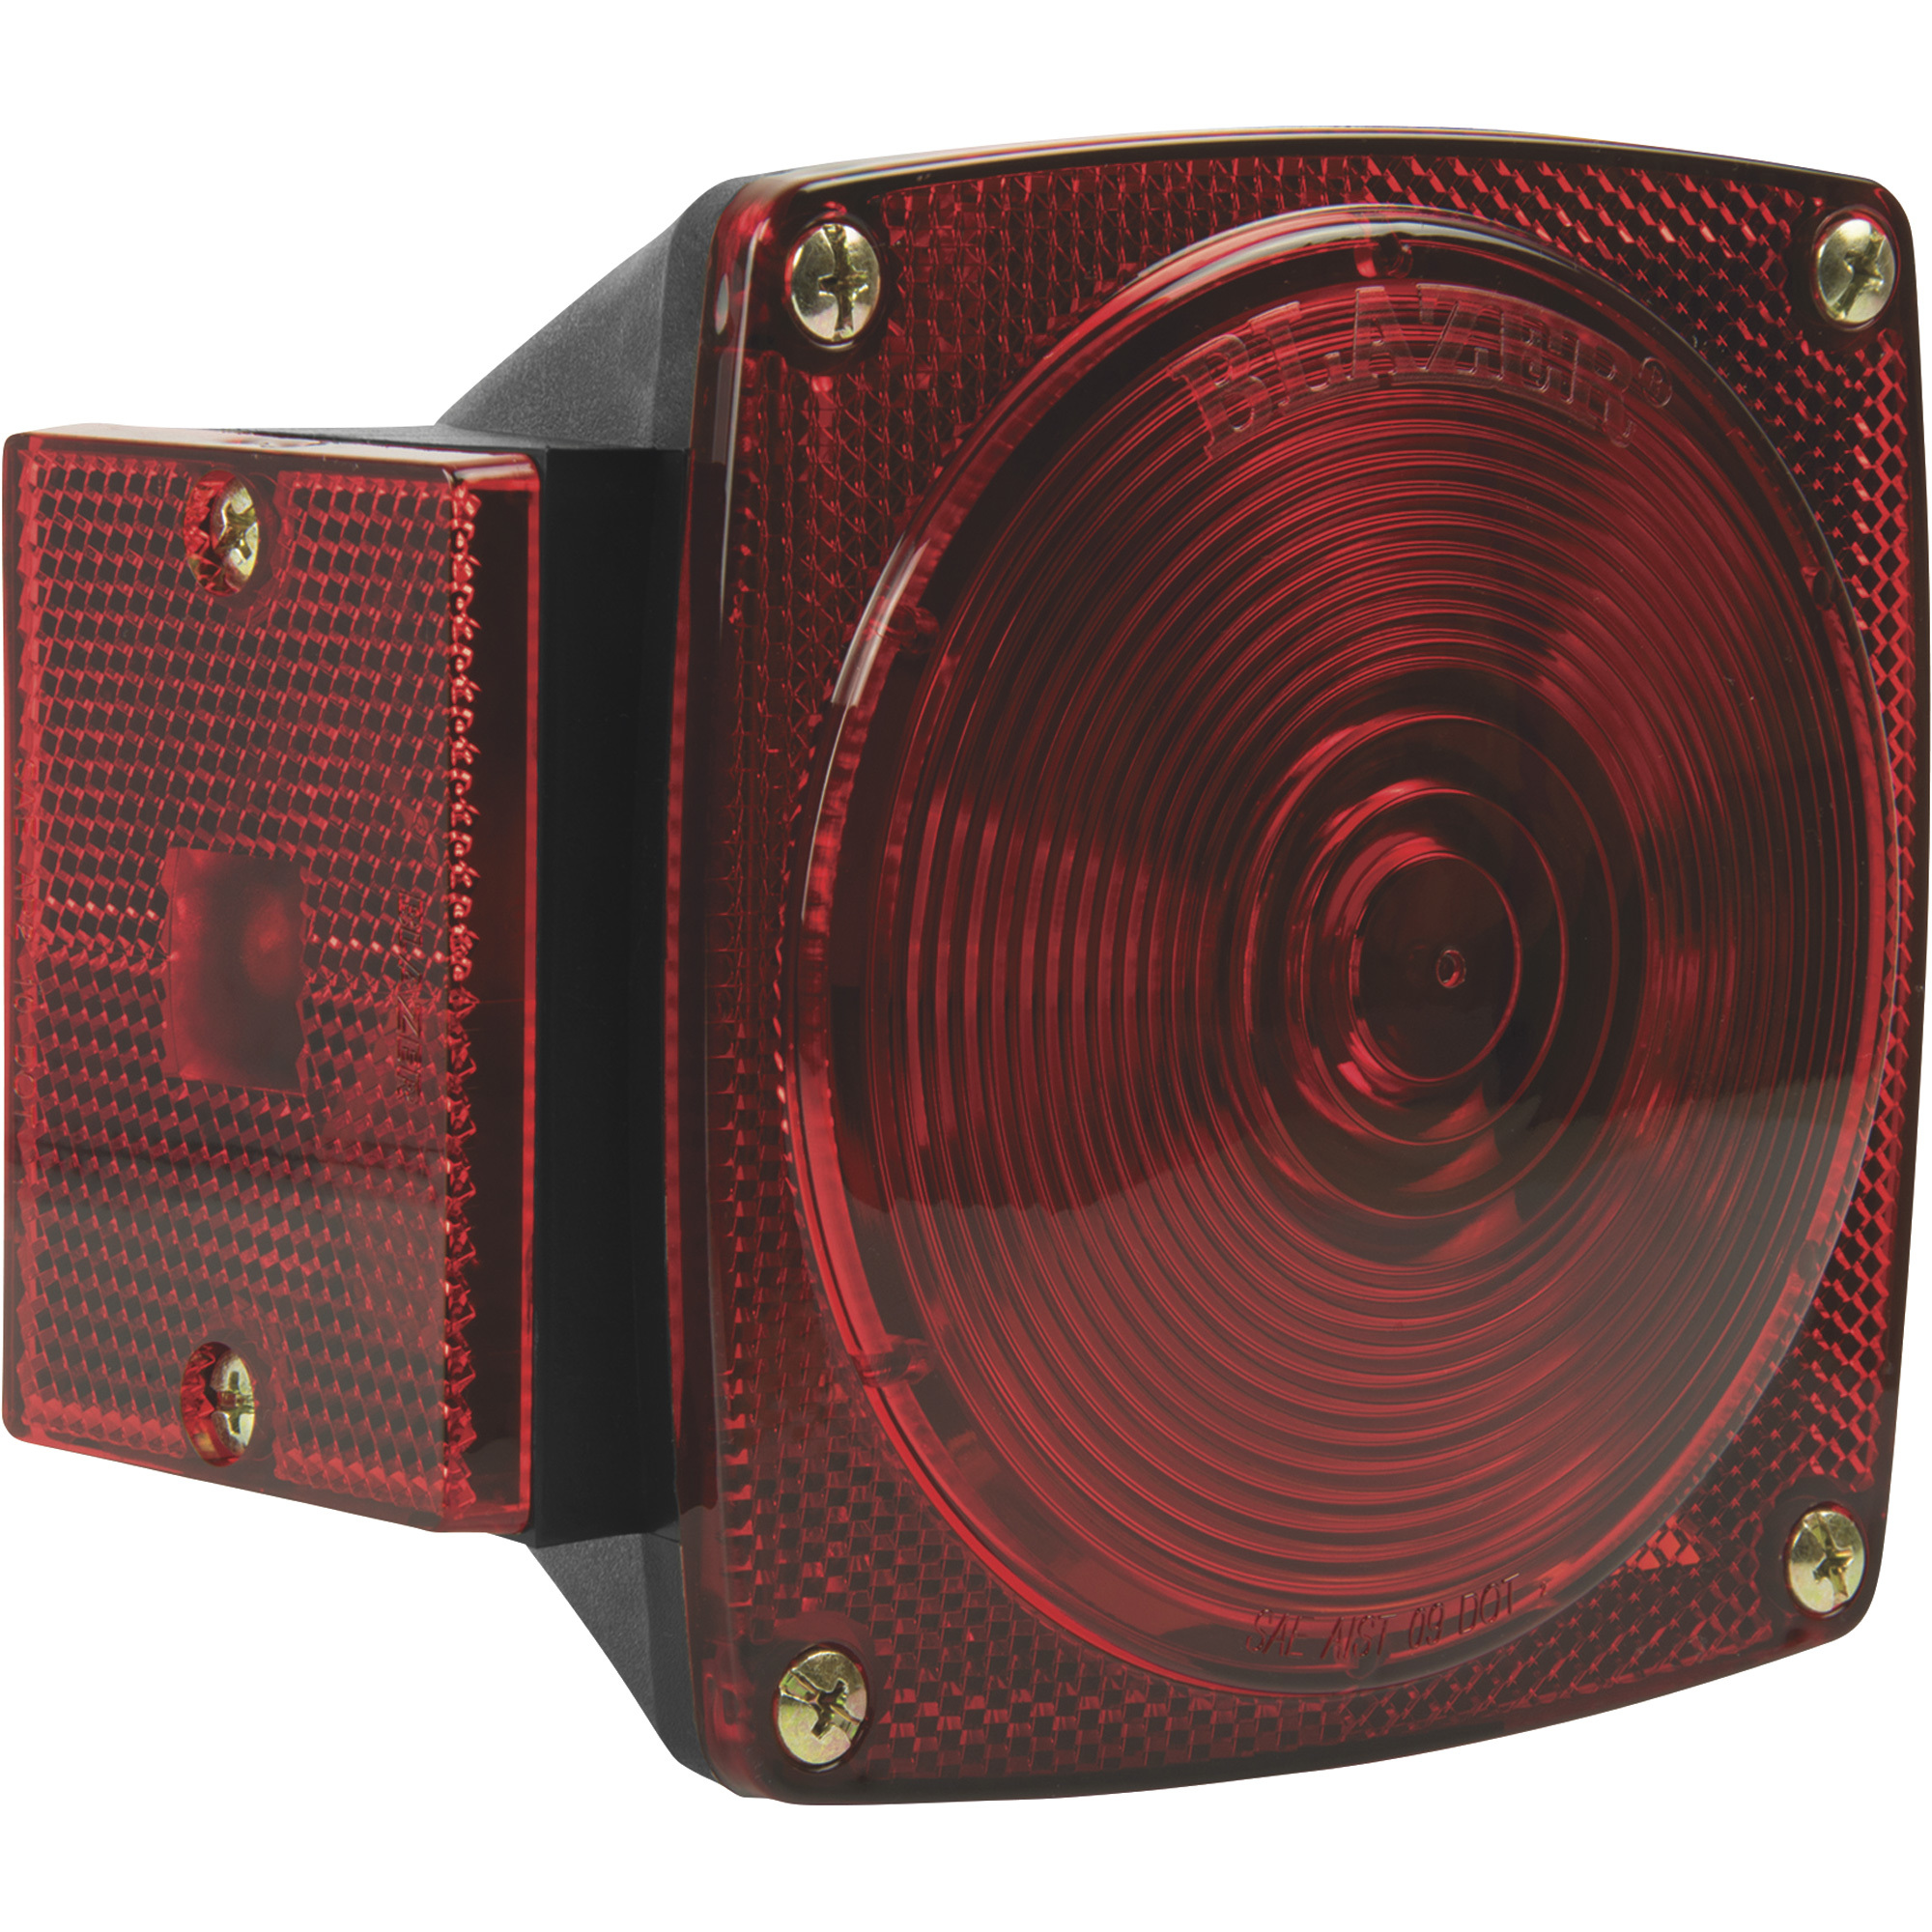 Hopkins Towing Solutions Incandescent Stop, Turn and Tail Trailer Light â 4 9/16Inch x 4 9/16Inch, Left Hand Side, Model B83